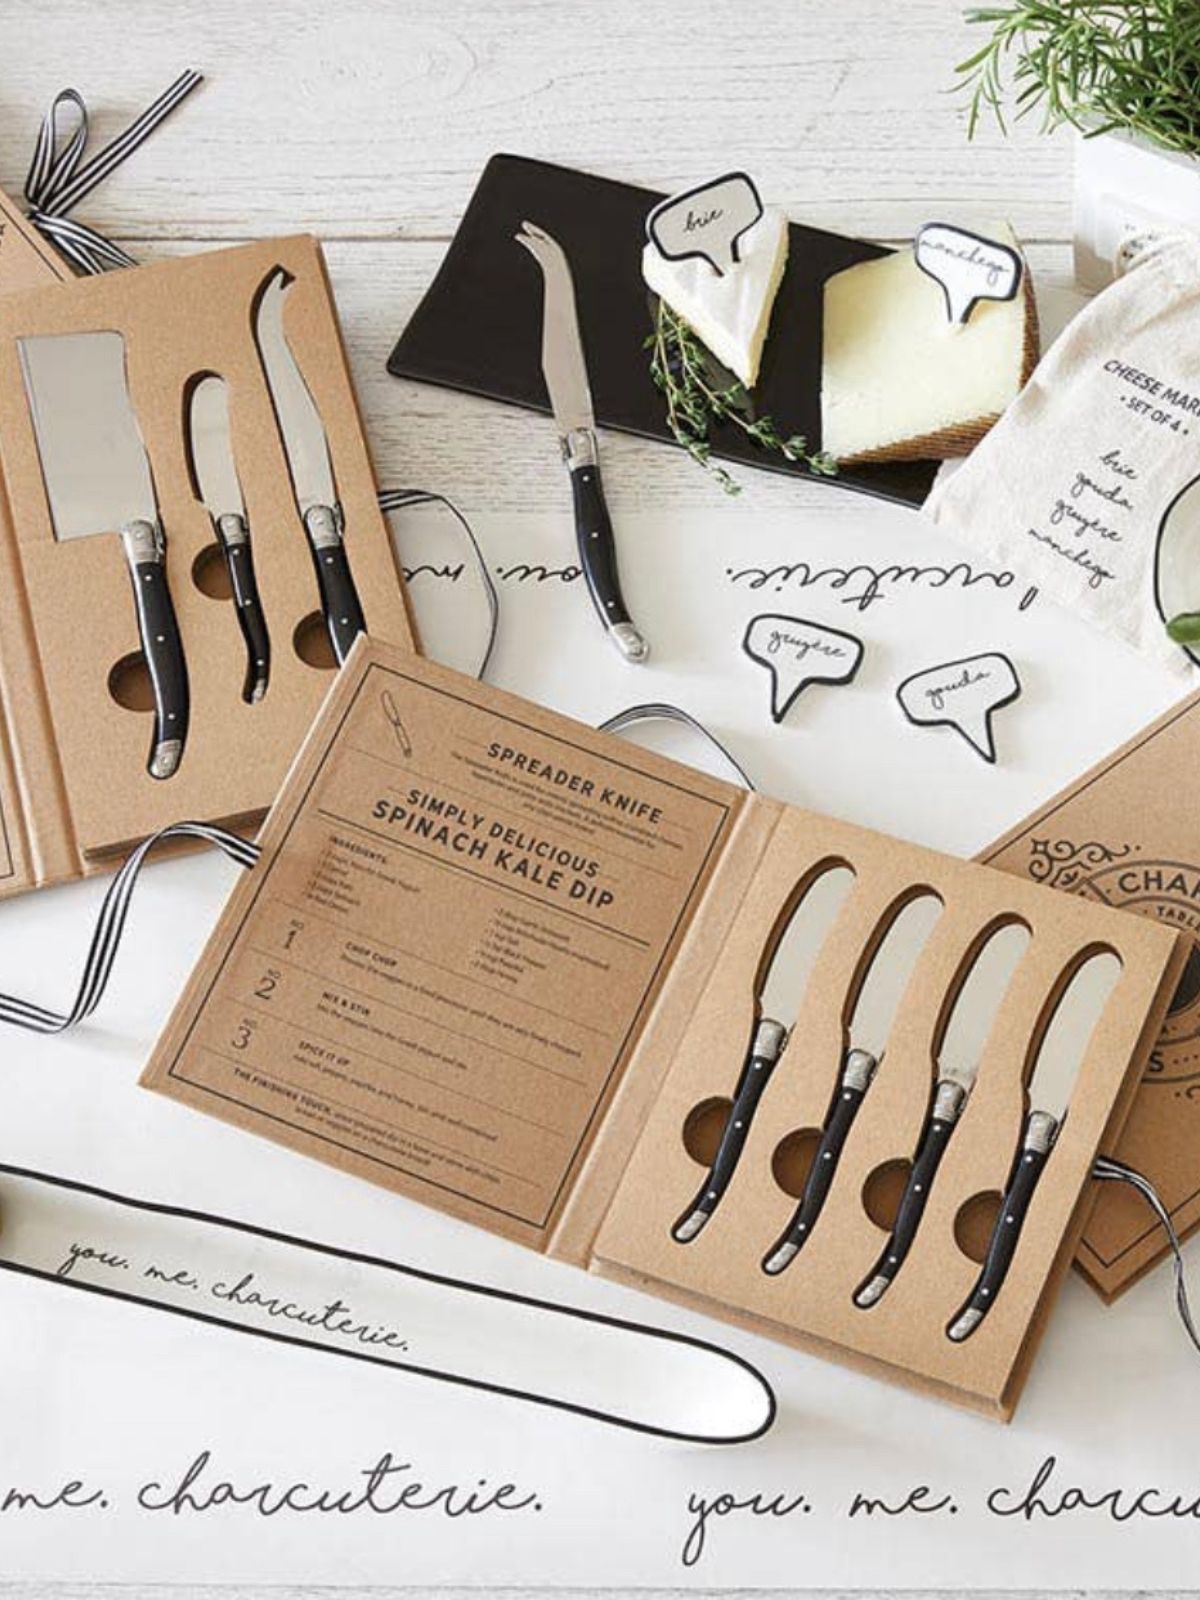 Gather up the tools needed to create your own charcuterie board with this set of essentials spreader knives made from stainless steel in Corrugated cardboard box sold by KYA Home Decor. 